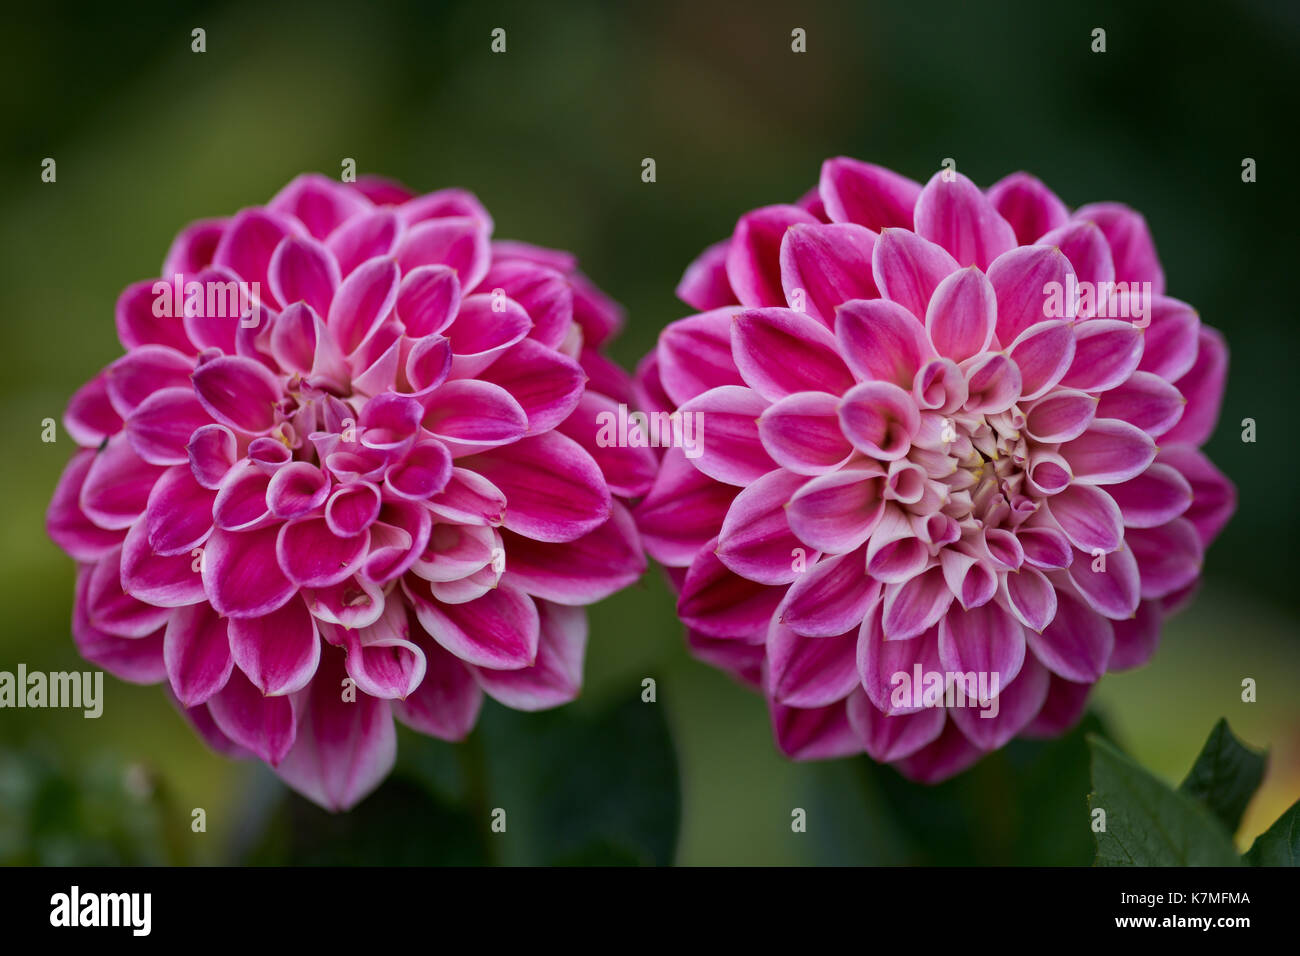 Two pink purple dahlia Two pink purple dahlias  close up two pink dahlias with white petal's edges Stock Photo